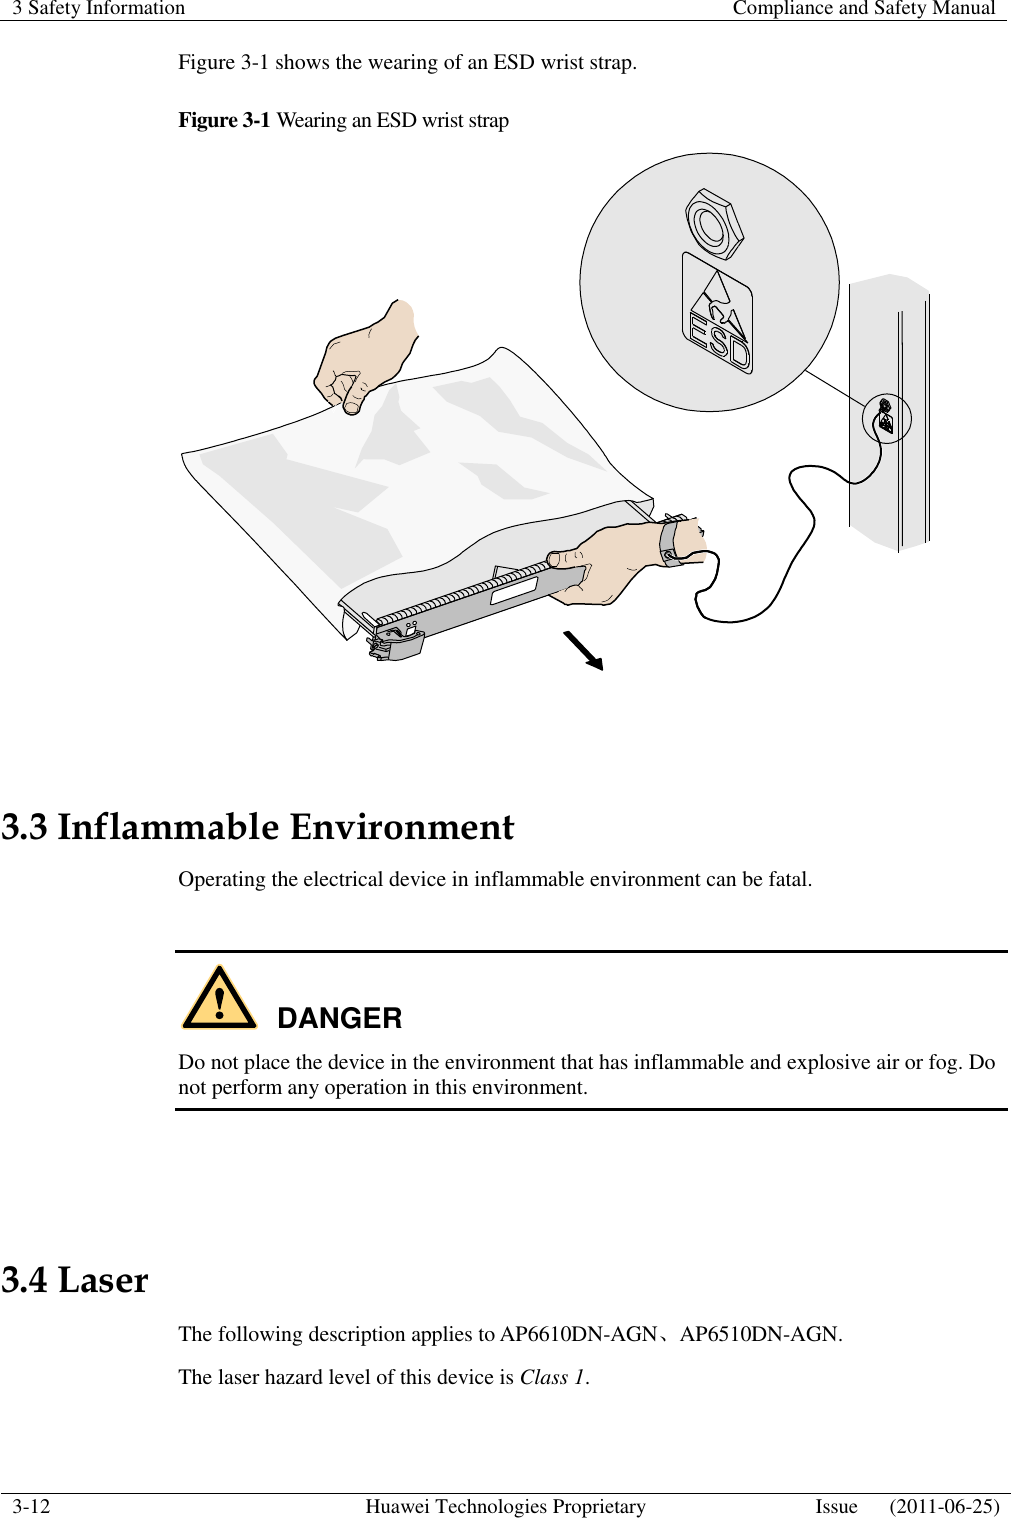 3 Safety Information    Compliance and Safety Manual  3-12 Huawei Technologies Proprietary Issue      (2011-06-25)  Figure 3-1 shows the wearing of an ESD wrist strap. Figure 3-1 Wearing an ESD wrist strap   3.3 Inflammable Environment Operating the electrical device in inflammable environment can be fatal.  DANGER Do not place the device in the environment that has inflammable and explosive air or fog. Do not perform any operation in this environment.   3.4 Laser The following description applies to AP6610DN-AGN、AP6510DN-AGN. The laser hazard level of this device is Class 1.  